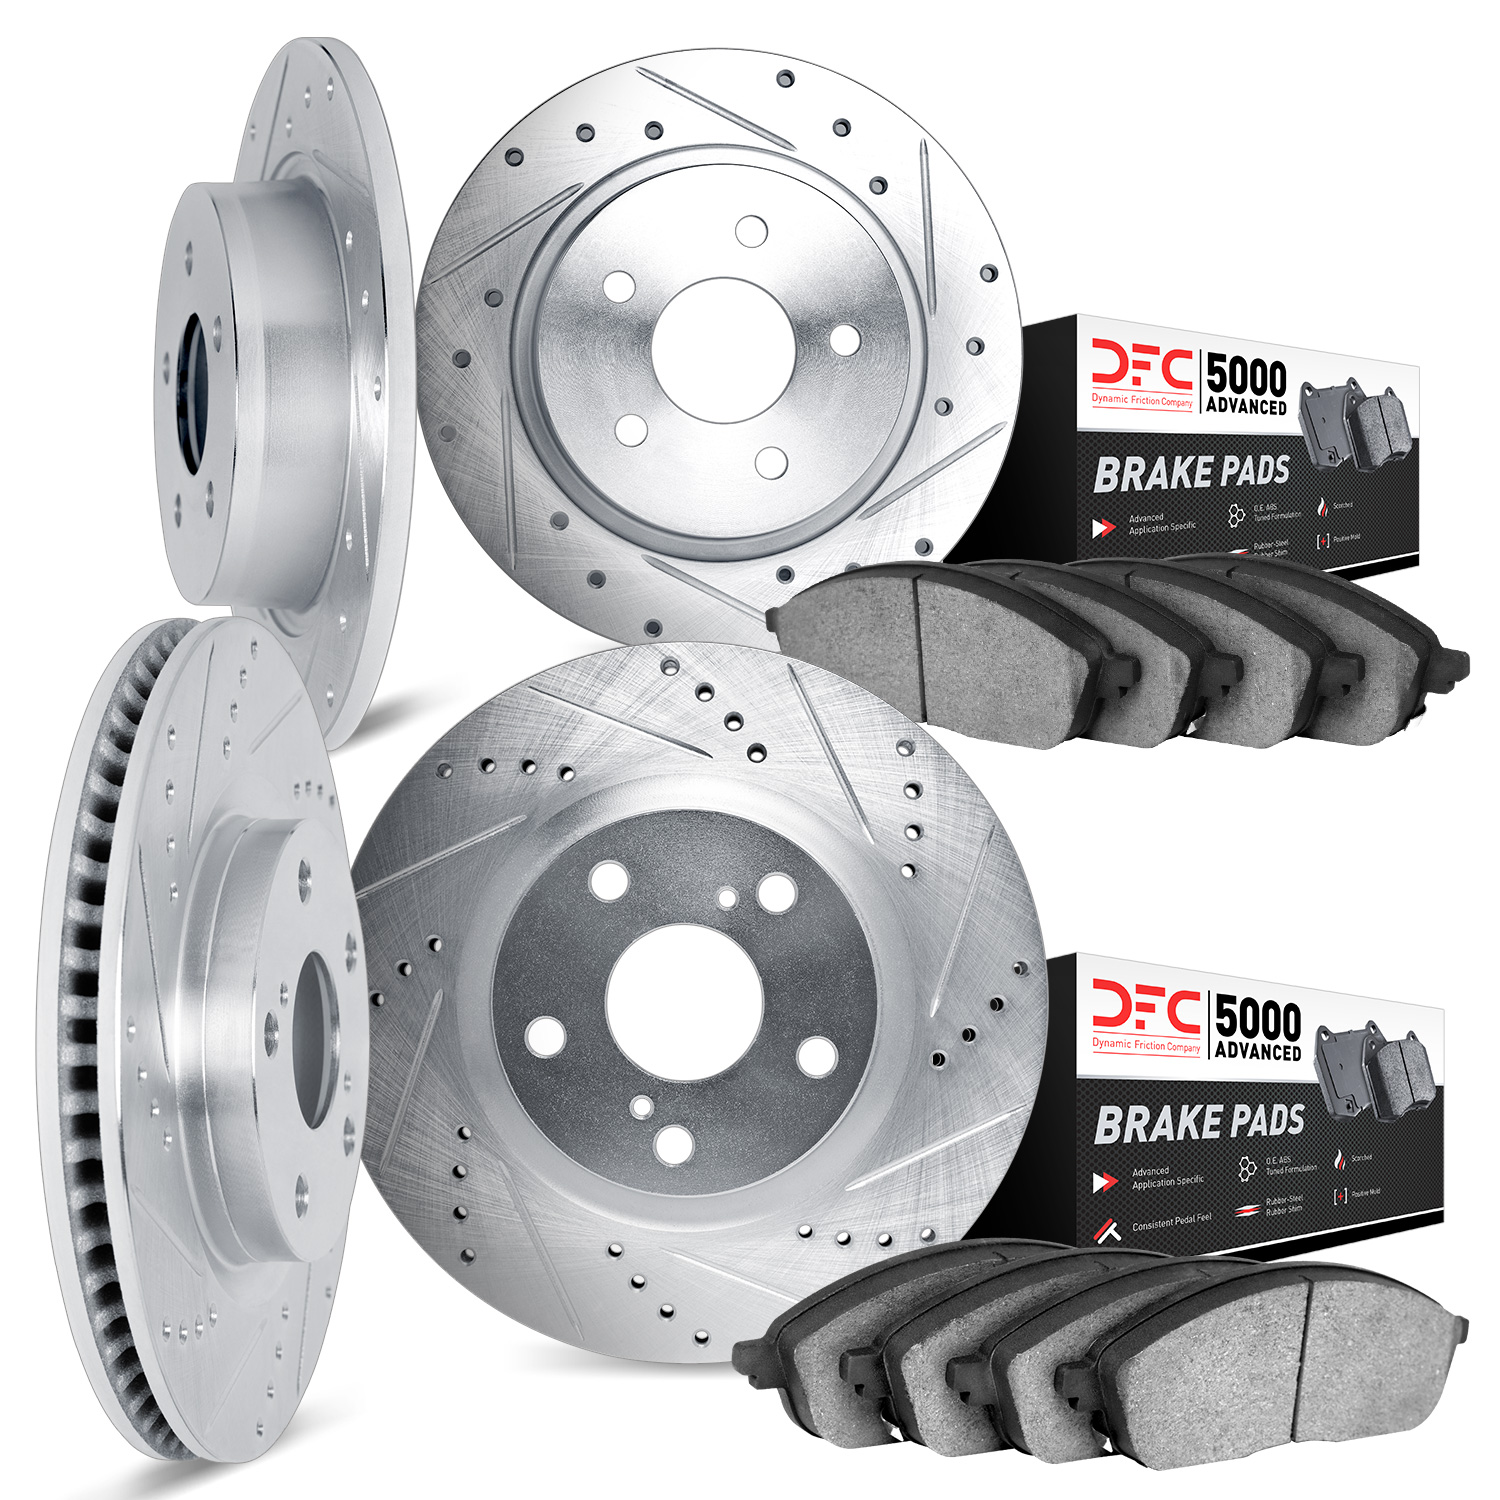 7504-76138 Drilled/Slotted Brake Rotors w/5000 Advanced Brake Pads Kit [Silver], 2001-2003 Lexus/Toyota/Scion, Position: Front a